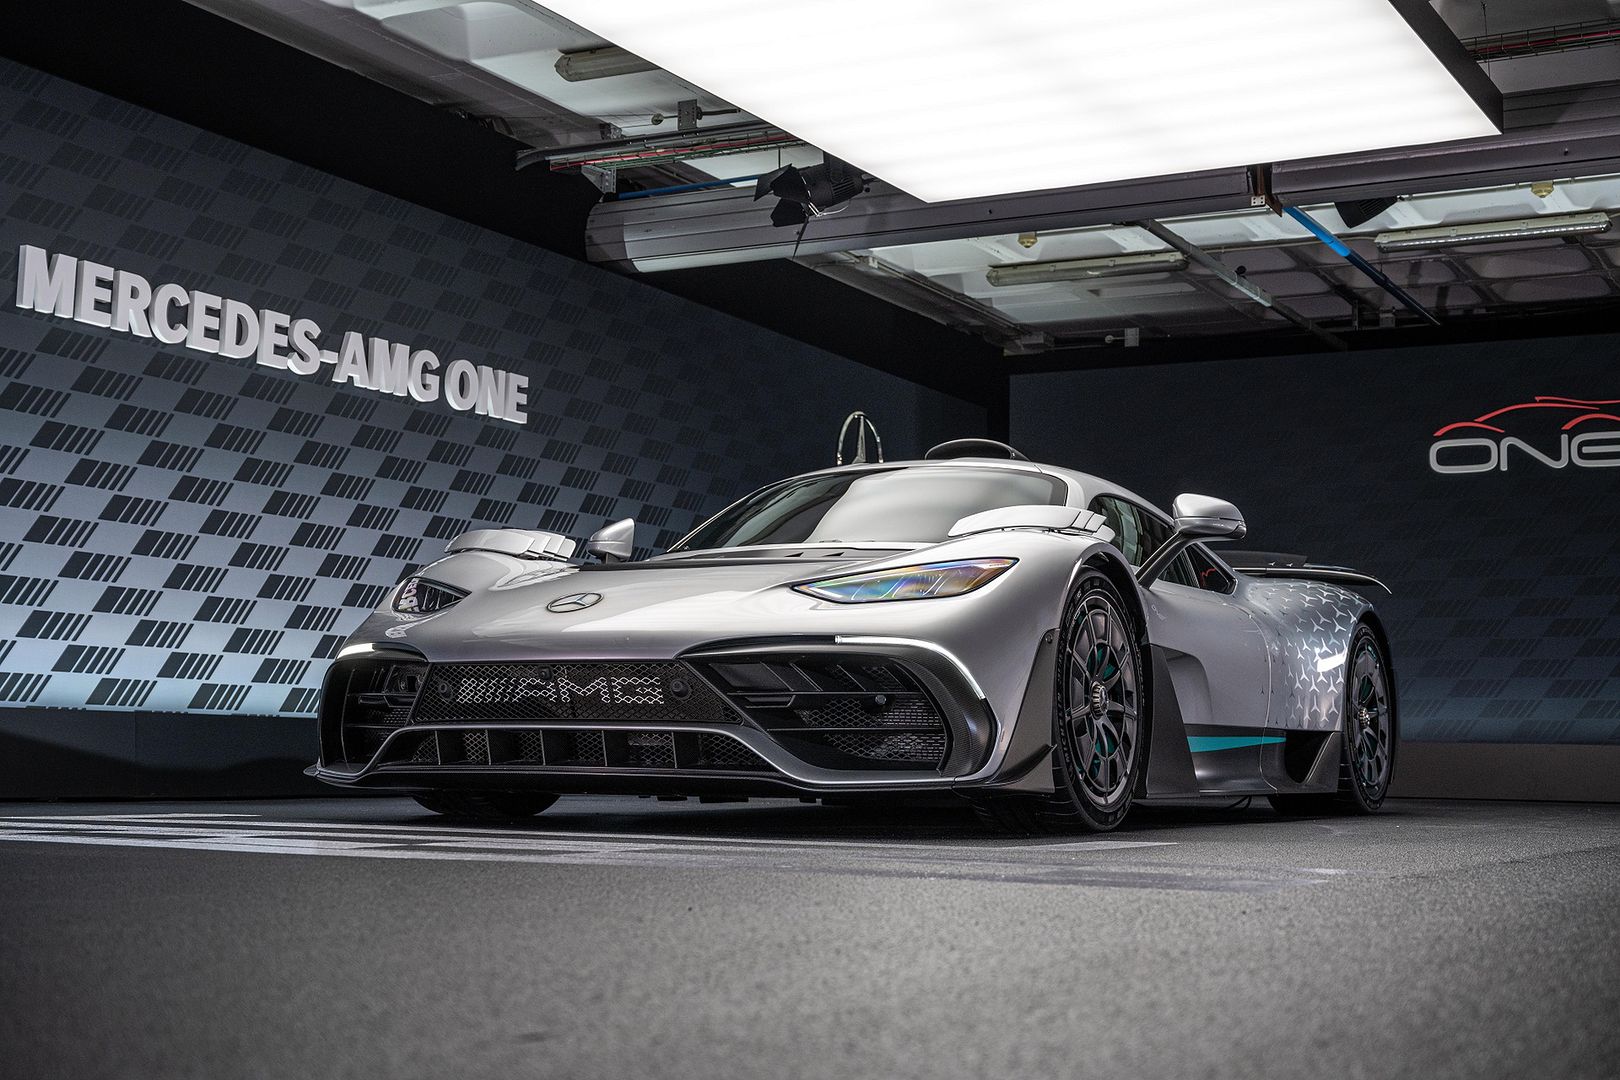 bao kanye west astonished the entire world by gifting justin bieber a mercedes amg project one supercar to celebrate the birth of his first son and express gratitude for their collaboration on the upcoming music video 65415c0571b07 Kanye West Astonished The Entire World By Gifting Justin Bieber A Mercedes-amg Project One Supercar To Celebrate The Birth Of His First Son And Express Gratitude For Their Collaboration On The Upcoming Music Video.